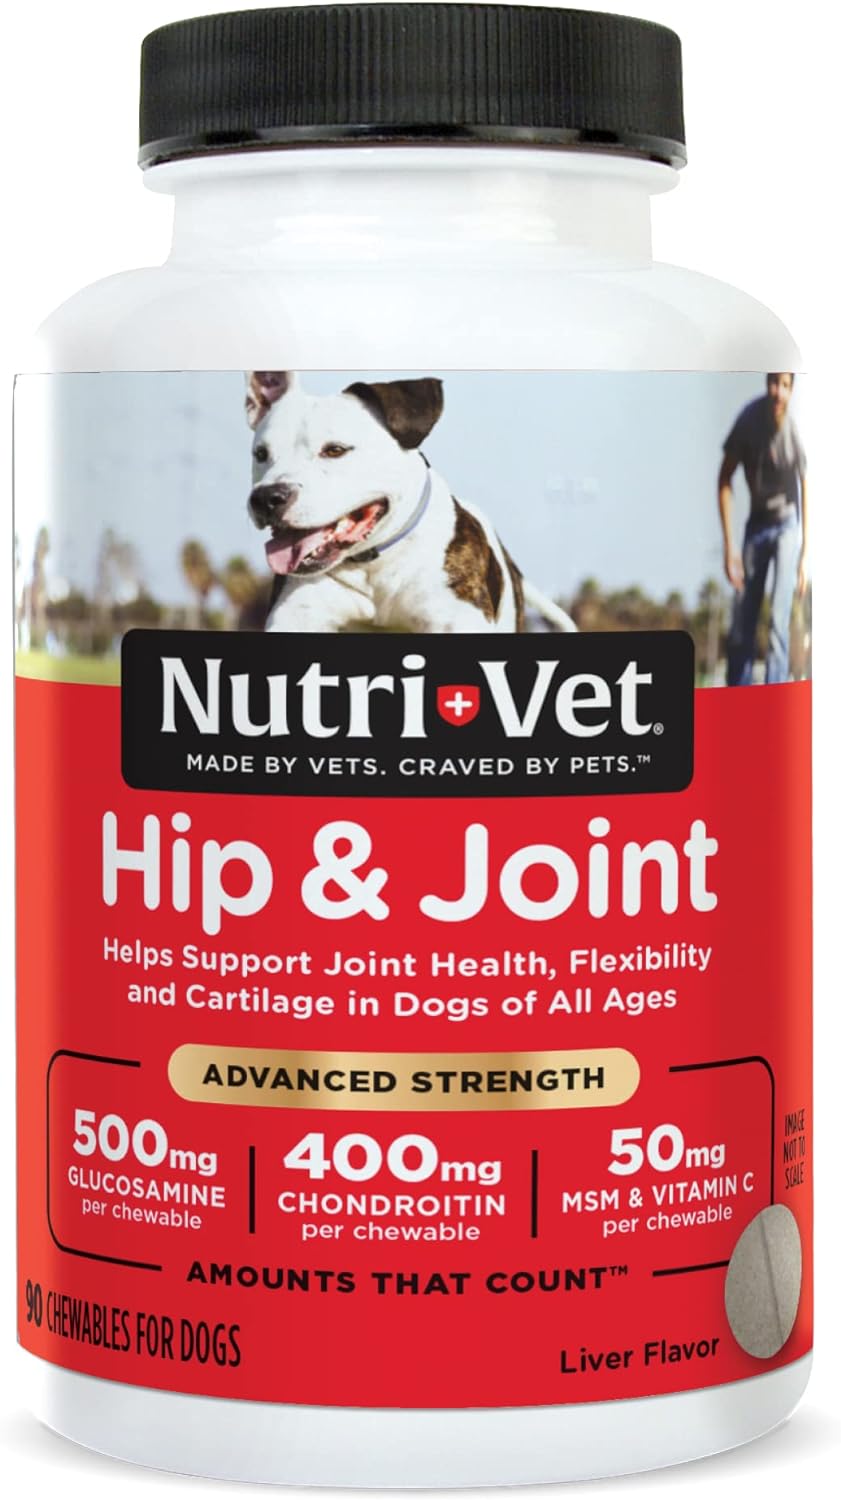 Nutri-Vet Hip & Joint Chewable Dog Supplements | Formulated with Glucosamine & Chondroitin for Dogs | 90 Count